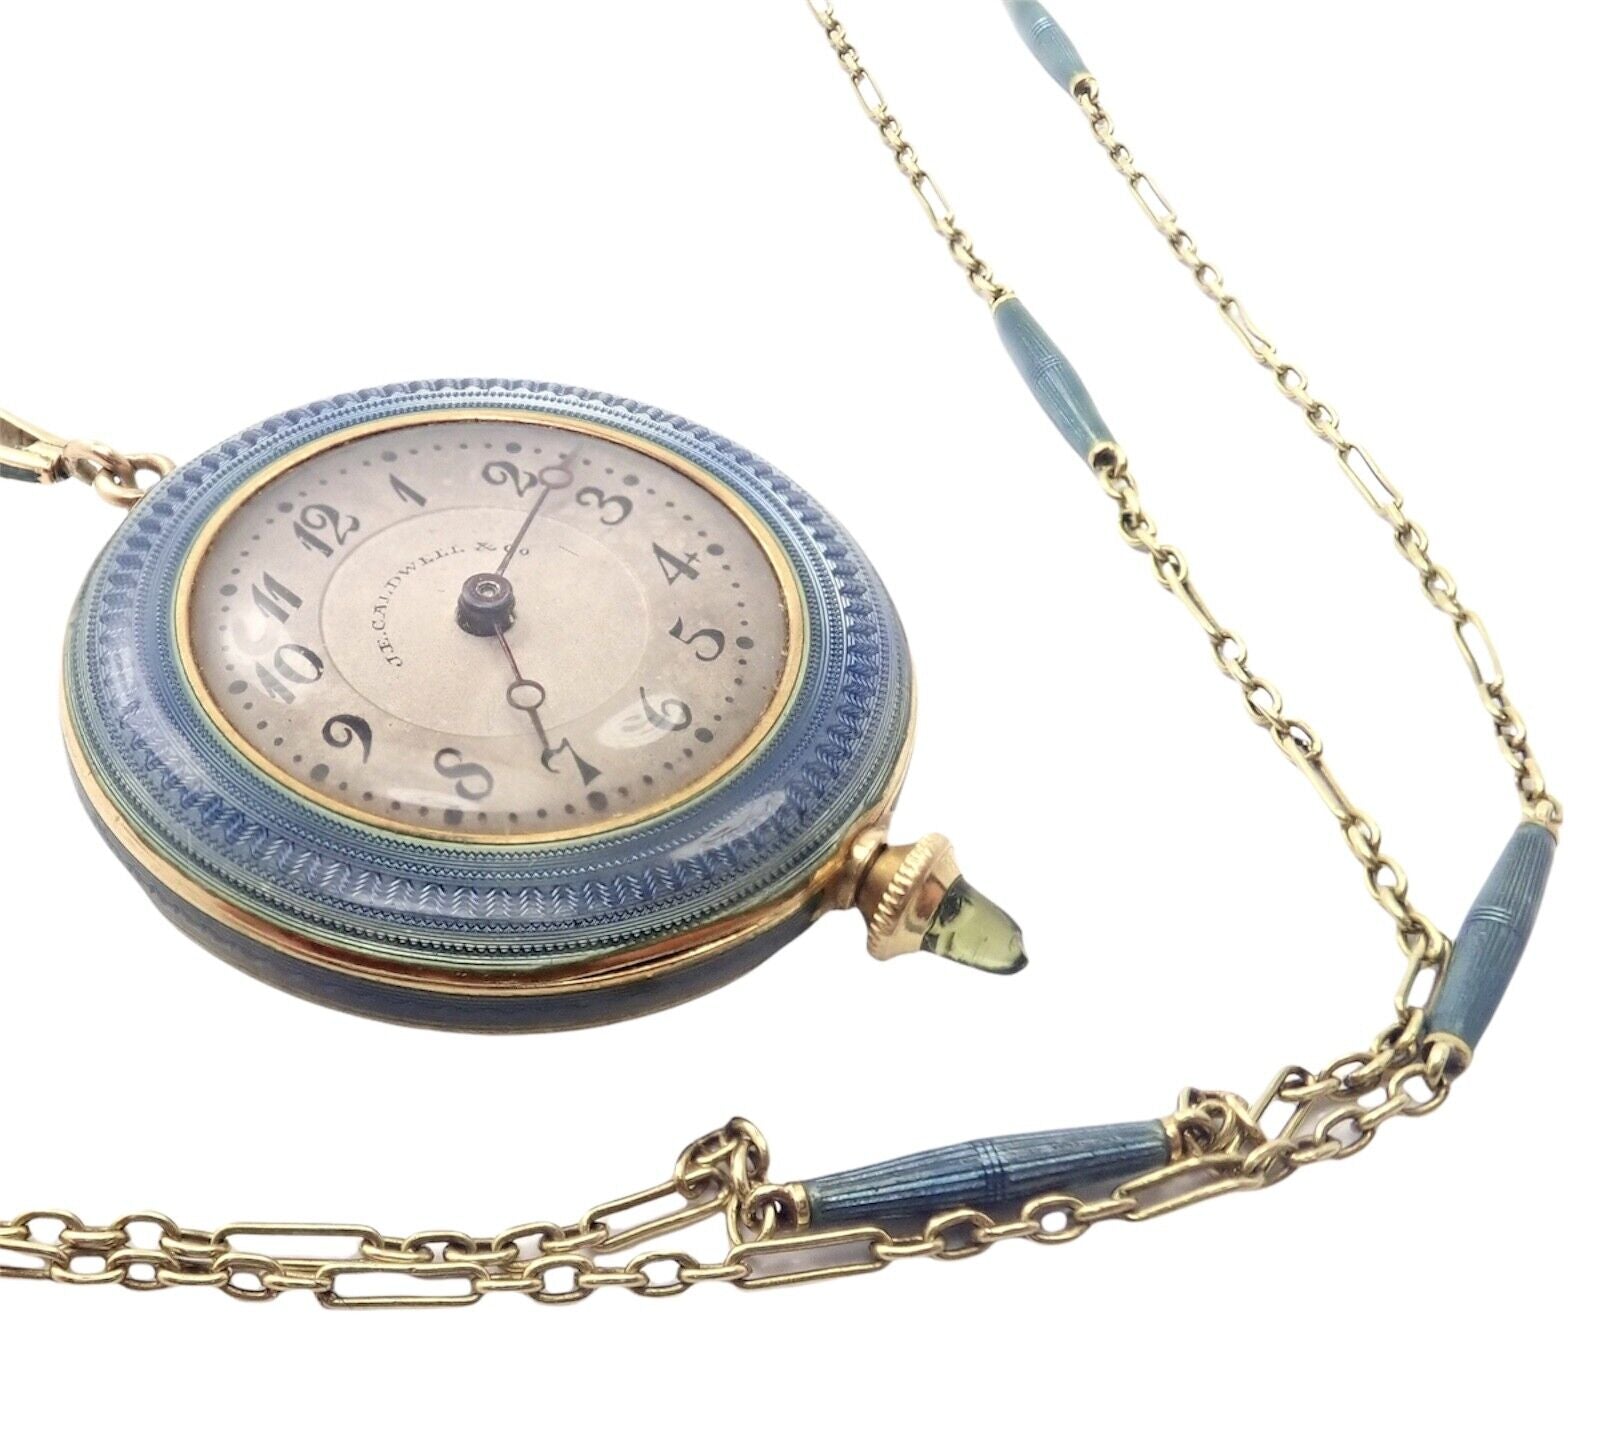 Tiffany & Co. Jewelry & Watches:Watches, Parts & Accessories:Watches:Other Watches Vintage JE Caldwell Longines 14k Yellow Gold Diamond Enamel 32" Pendant Watch